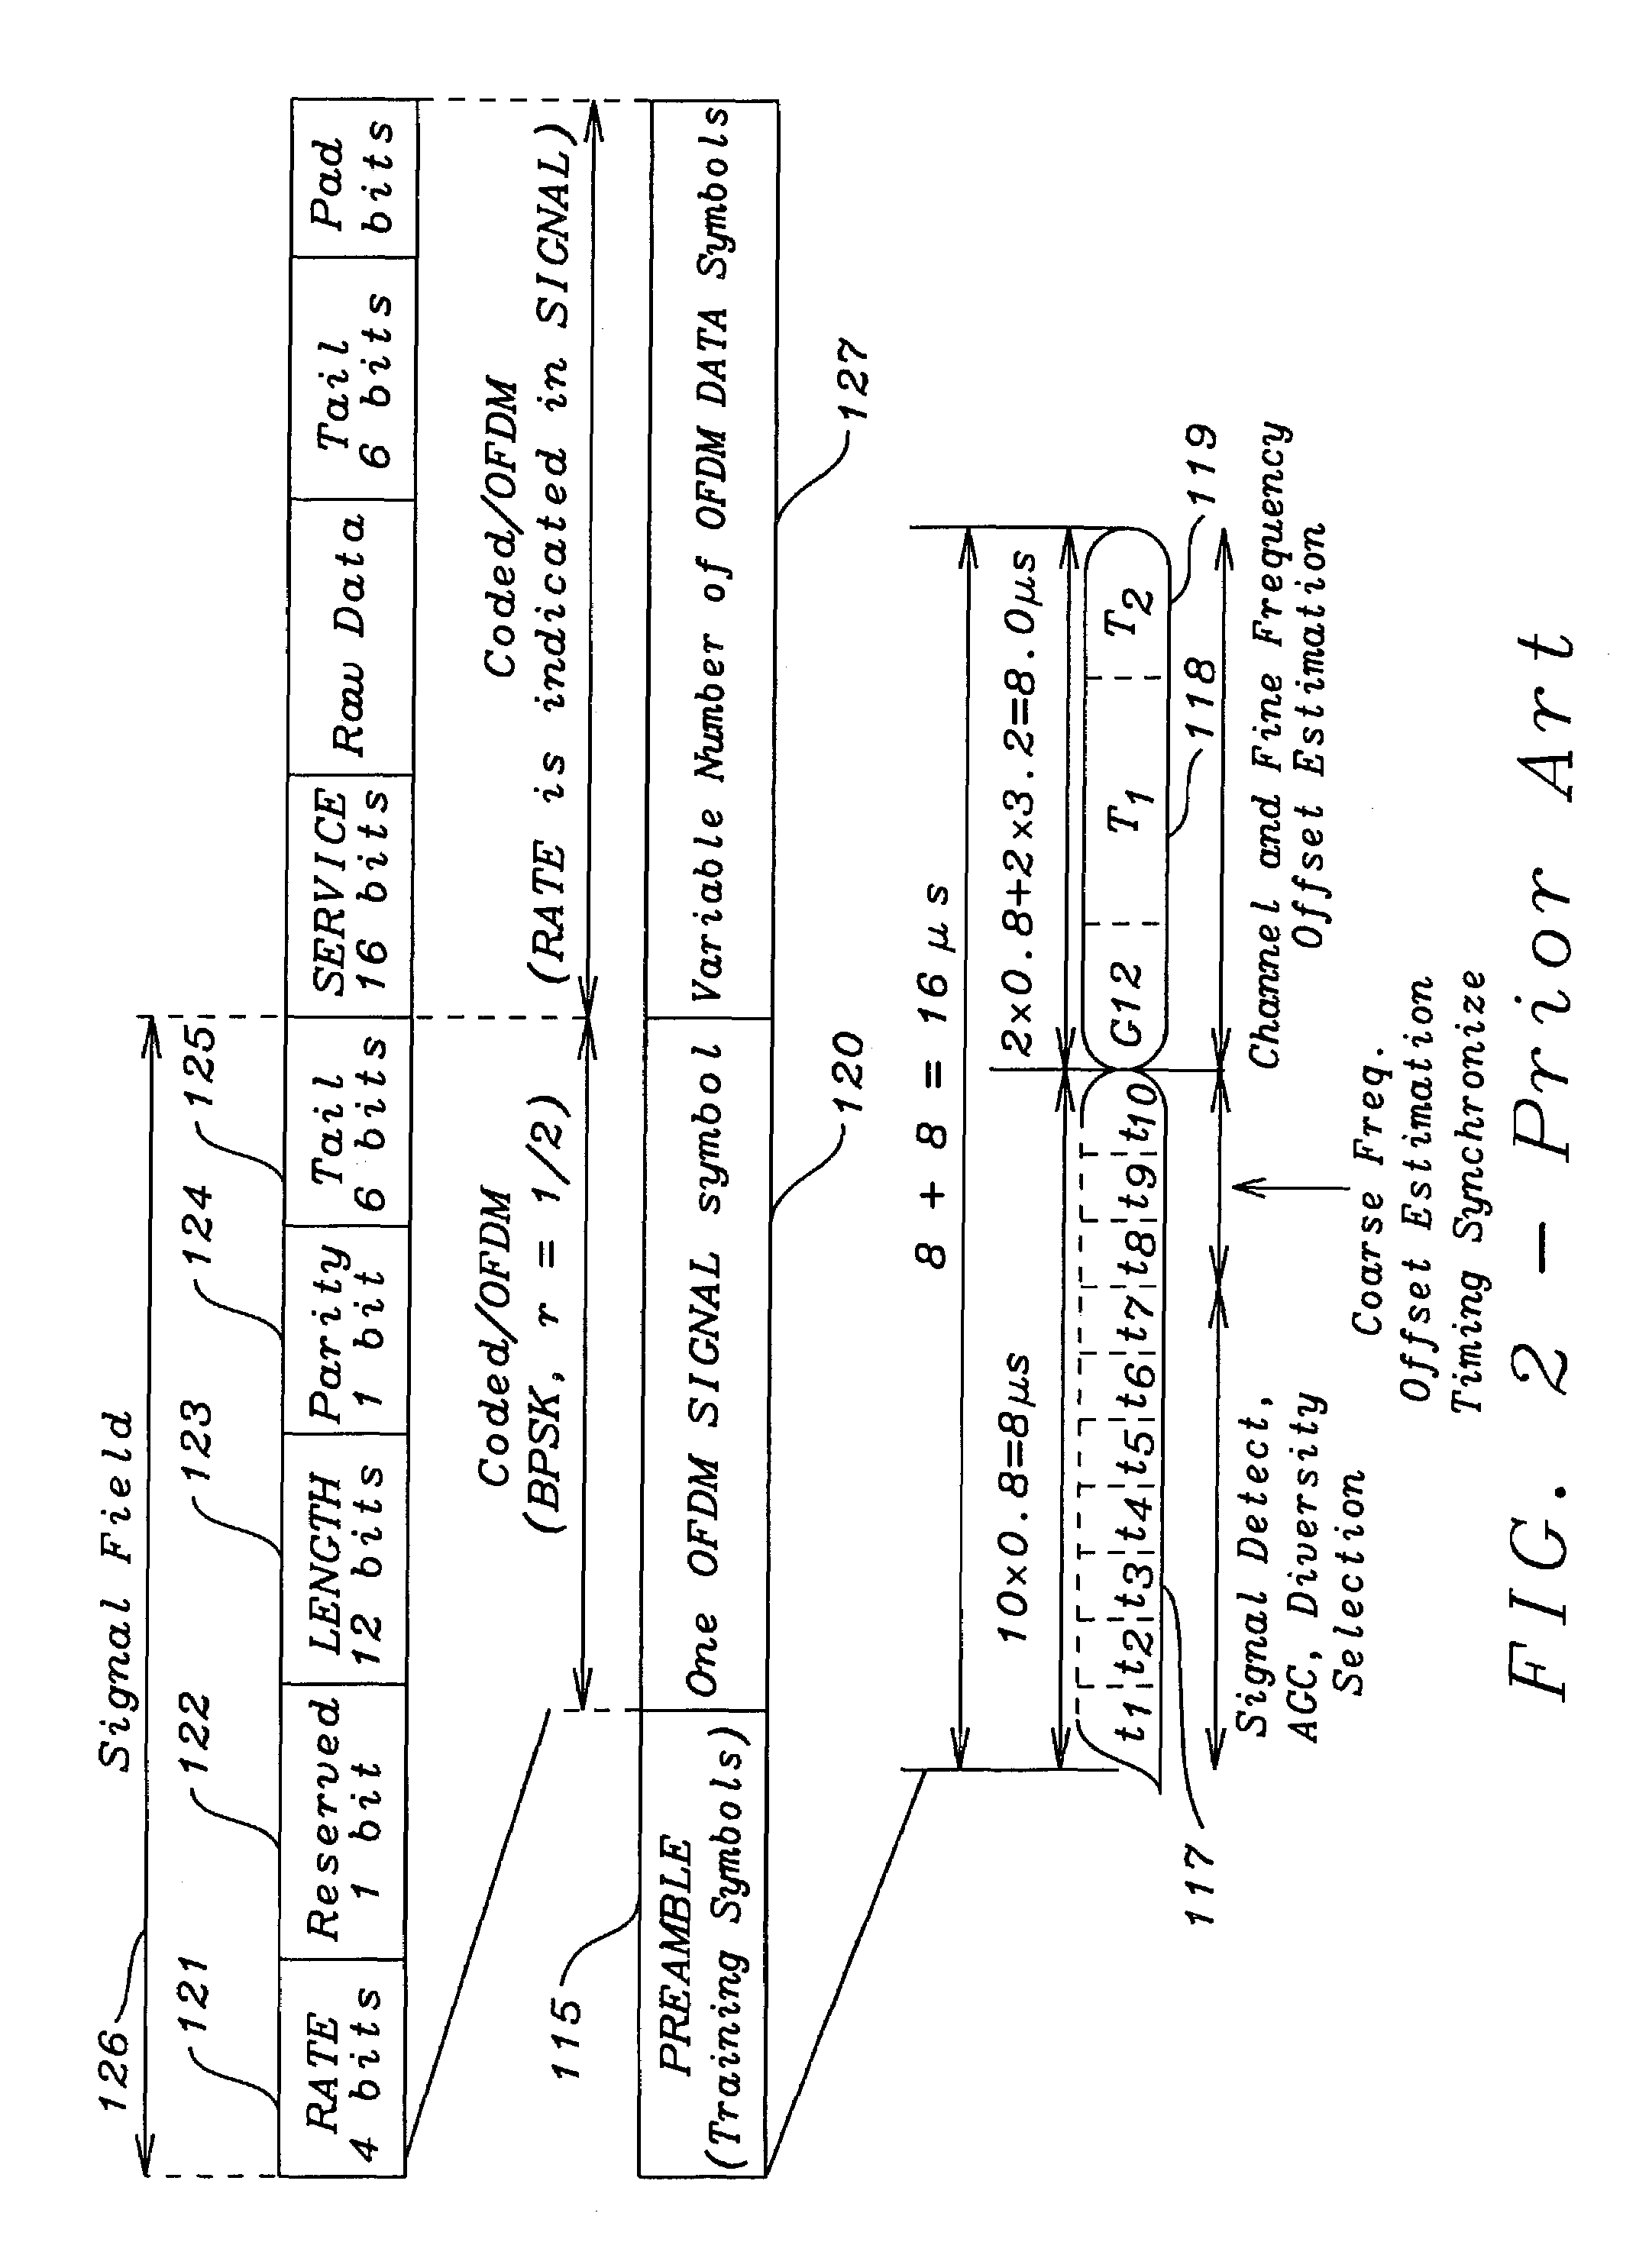 Method for reducing channel estimation error in an OFDM system